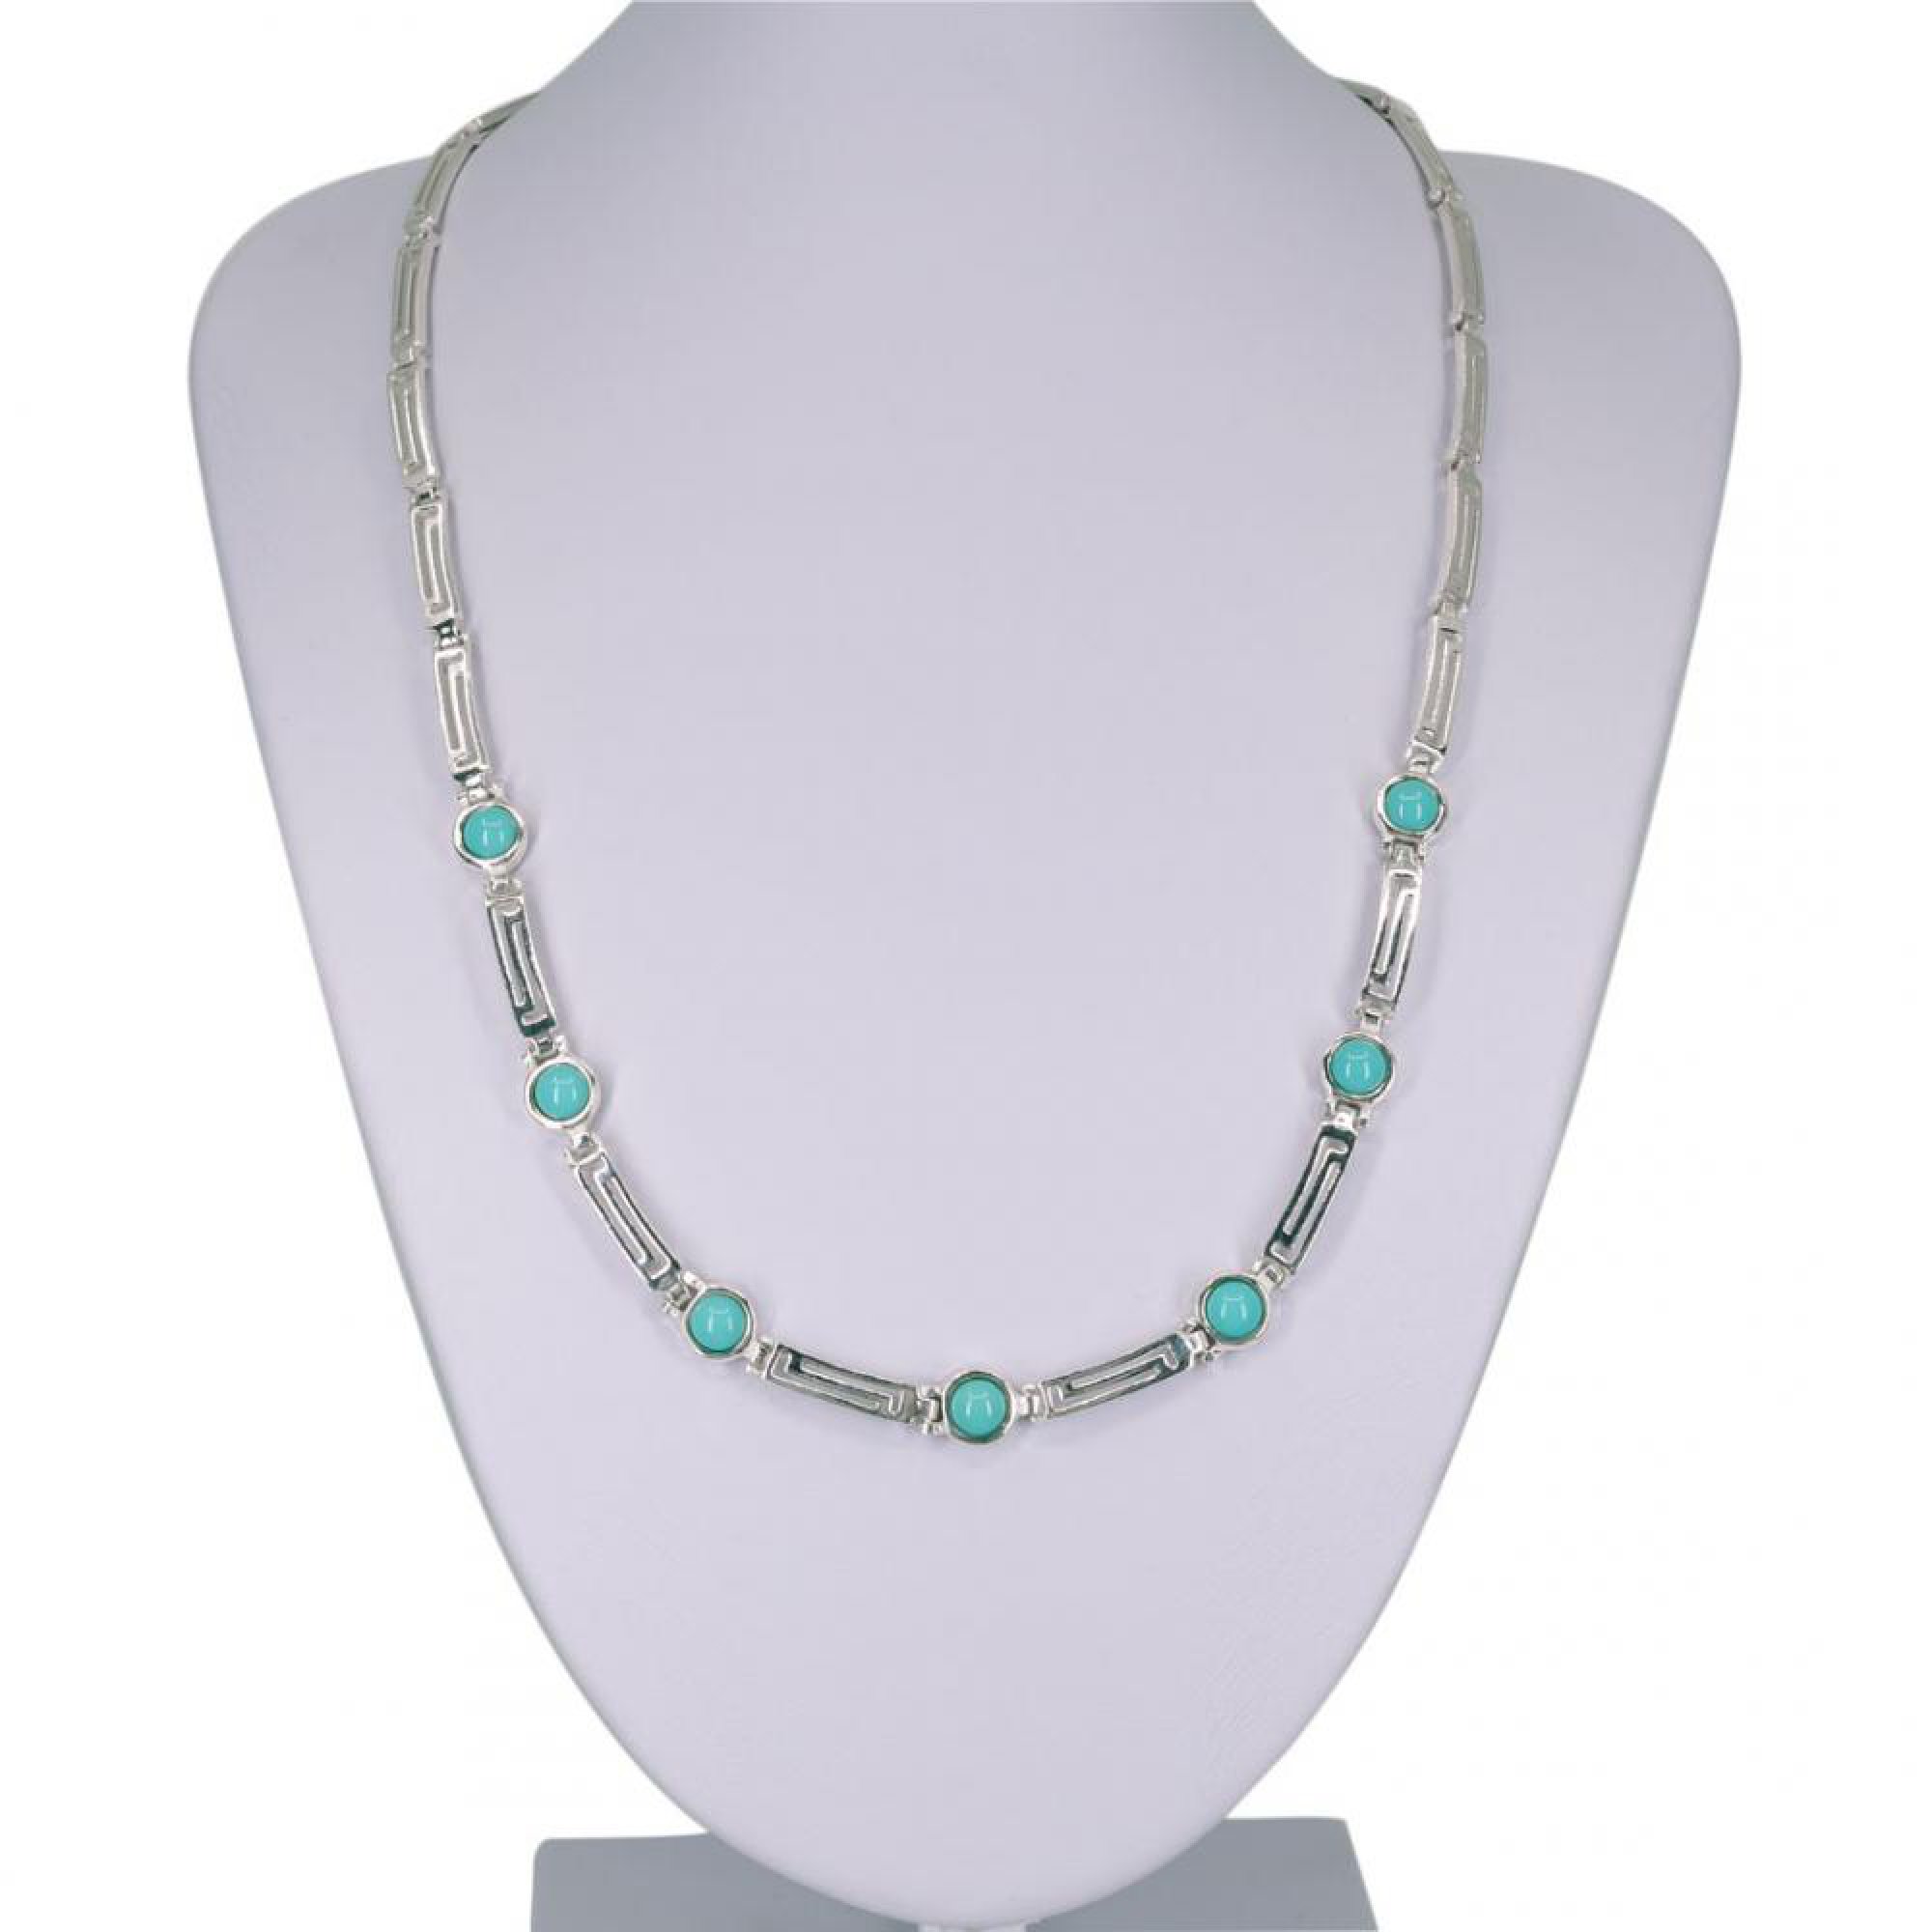 Meander necklace with turquoise stones